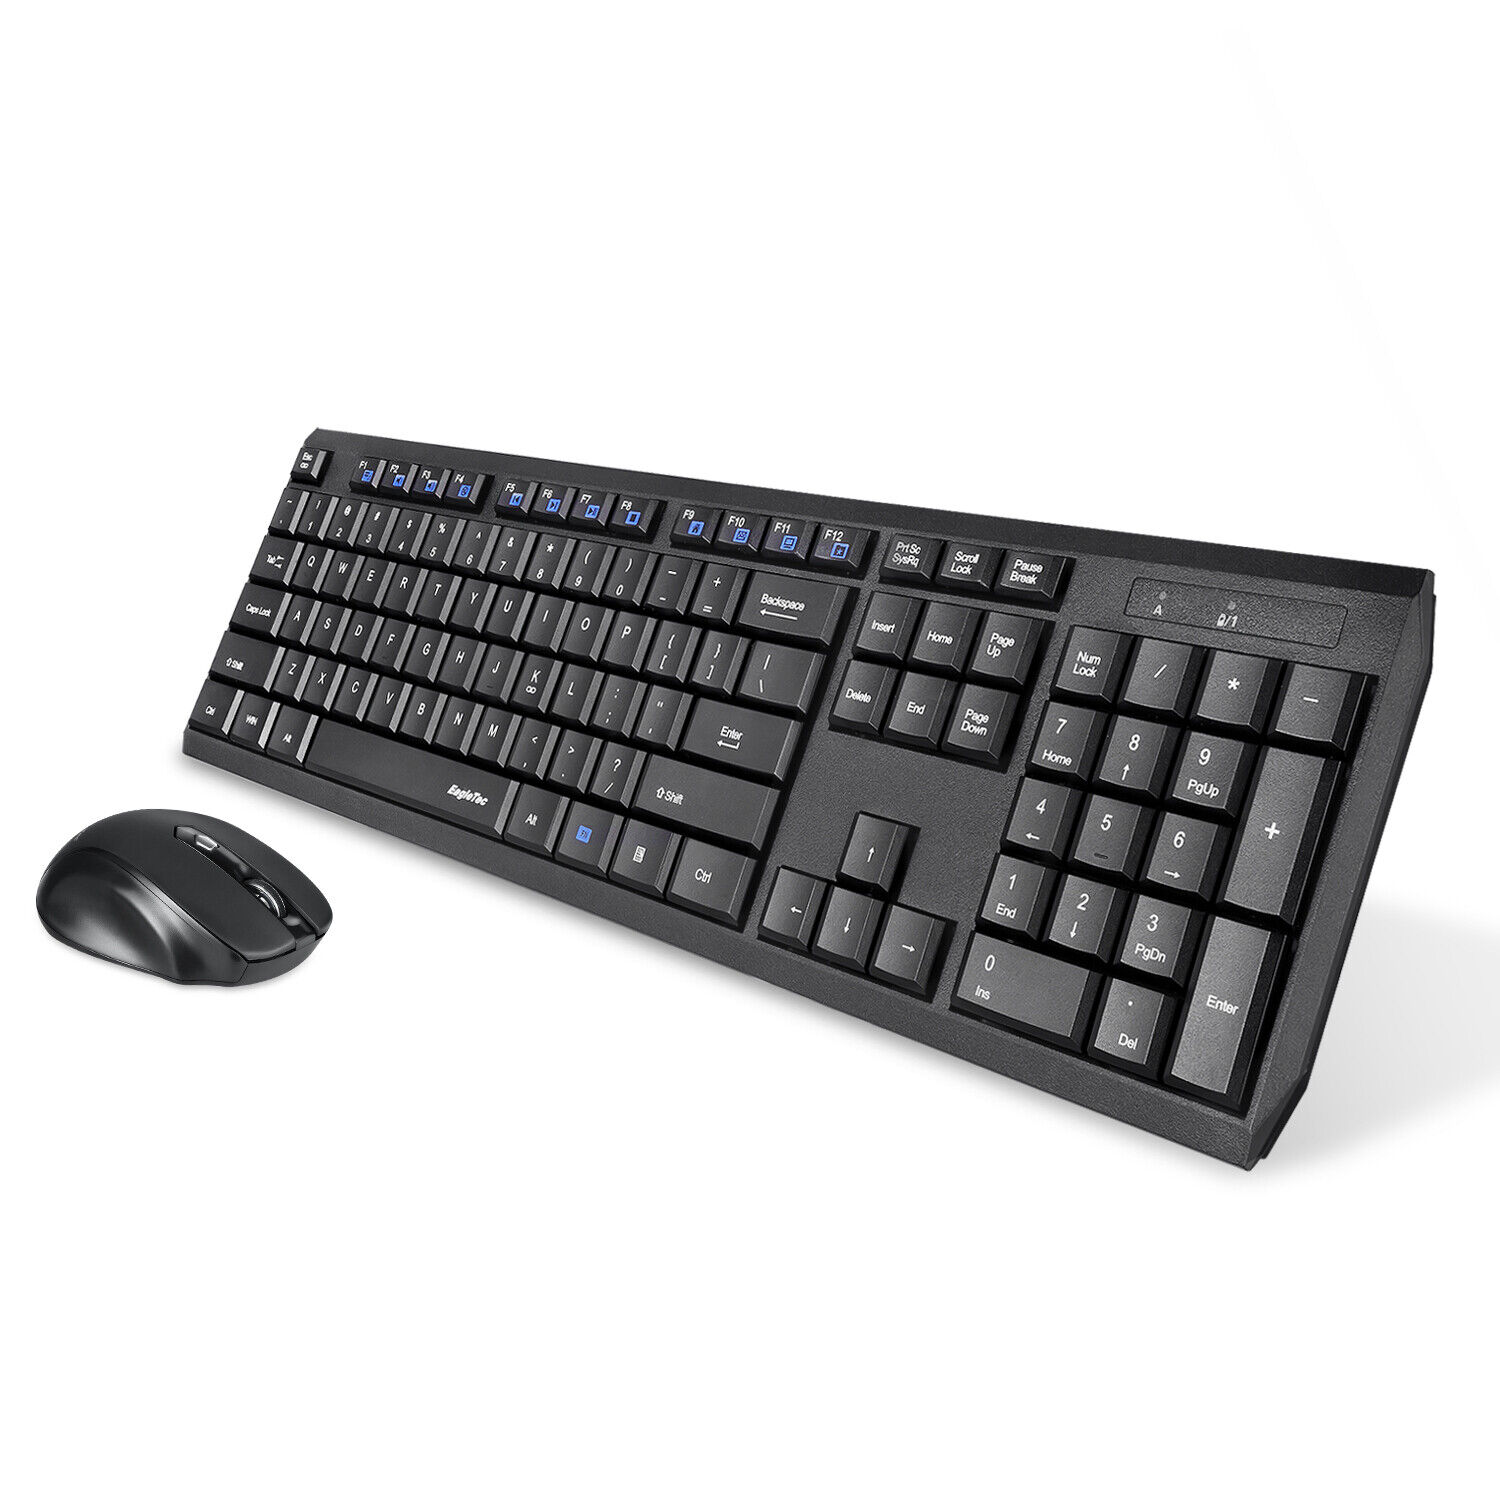 Eagletec K104 Wireless 104 Keys Keyboard and Mouse Combo for Windows PC